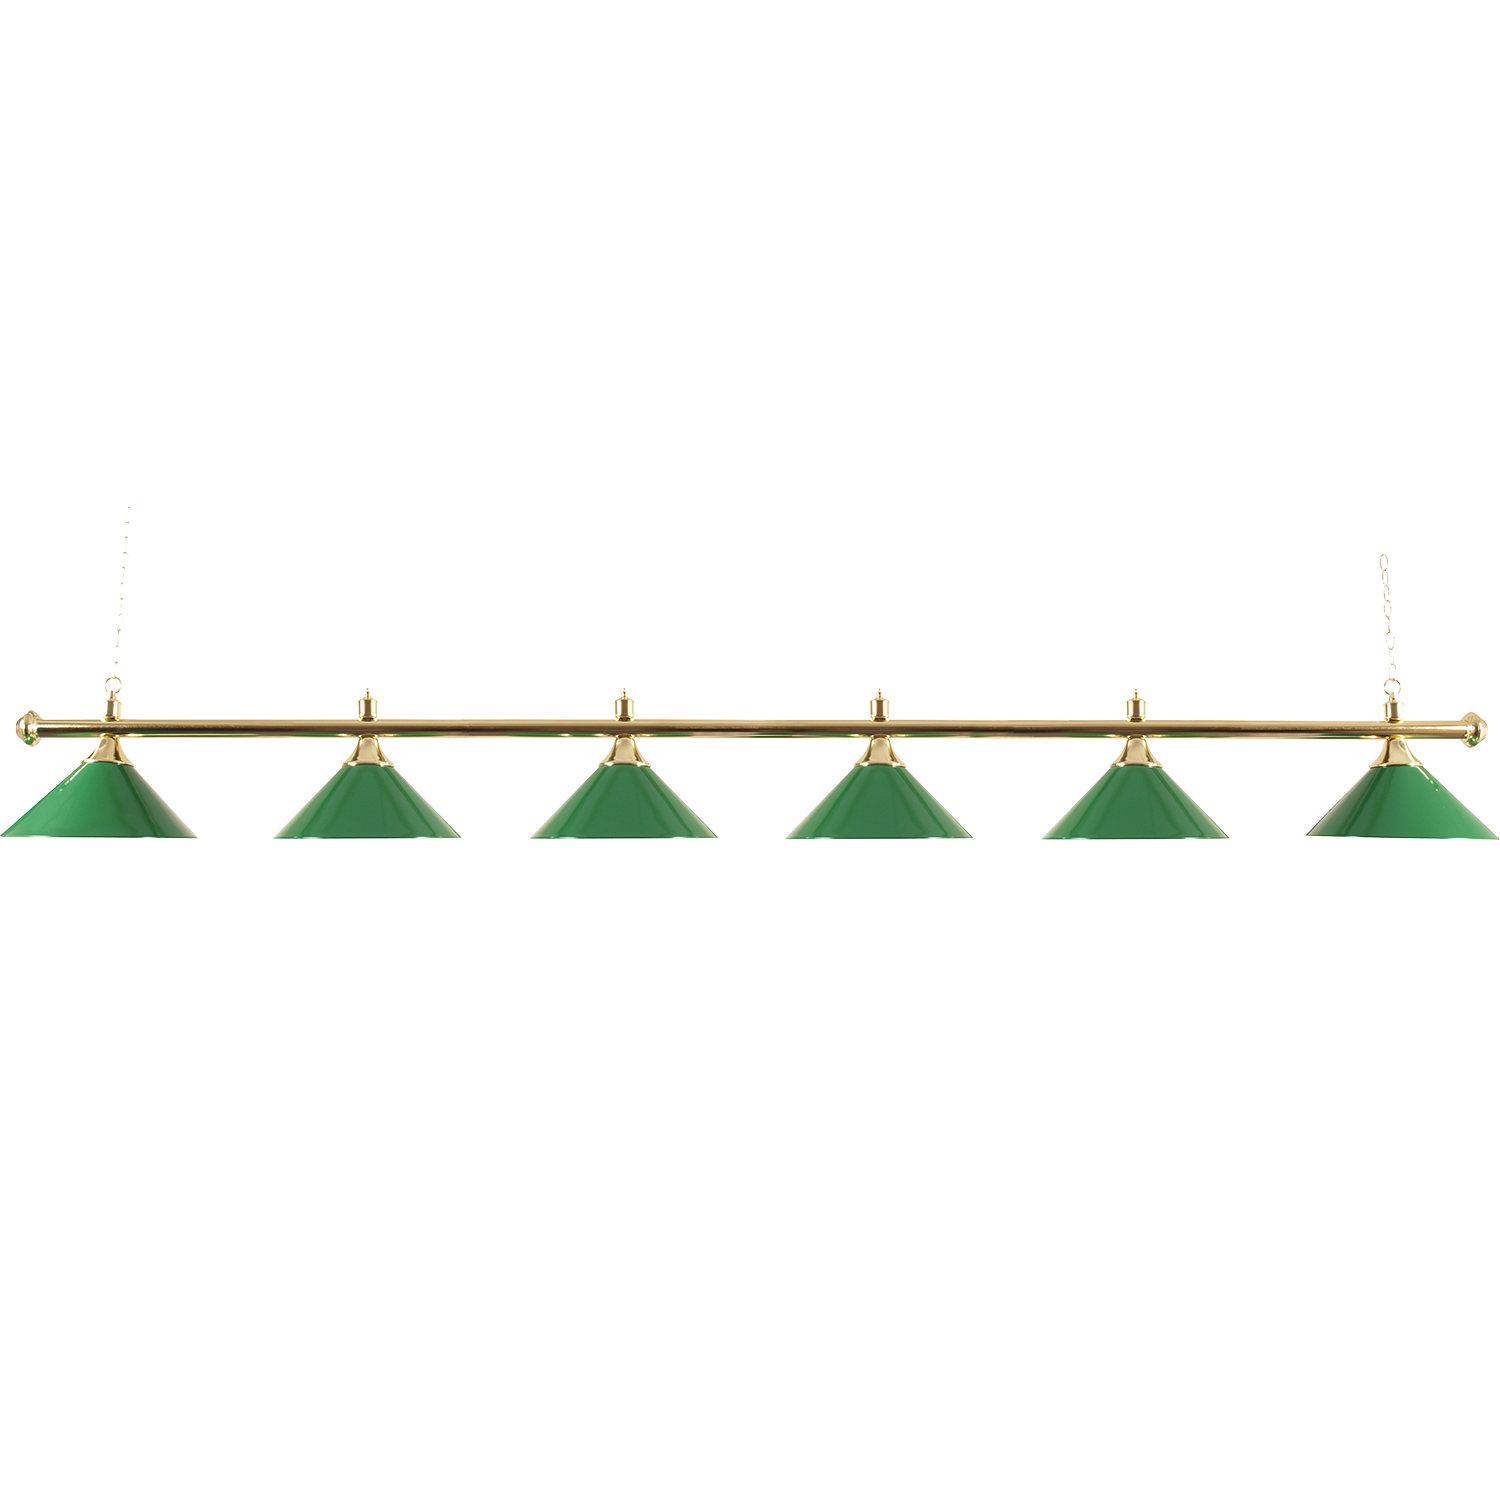 Snooker lamp with 6 shades, brass/green